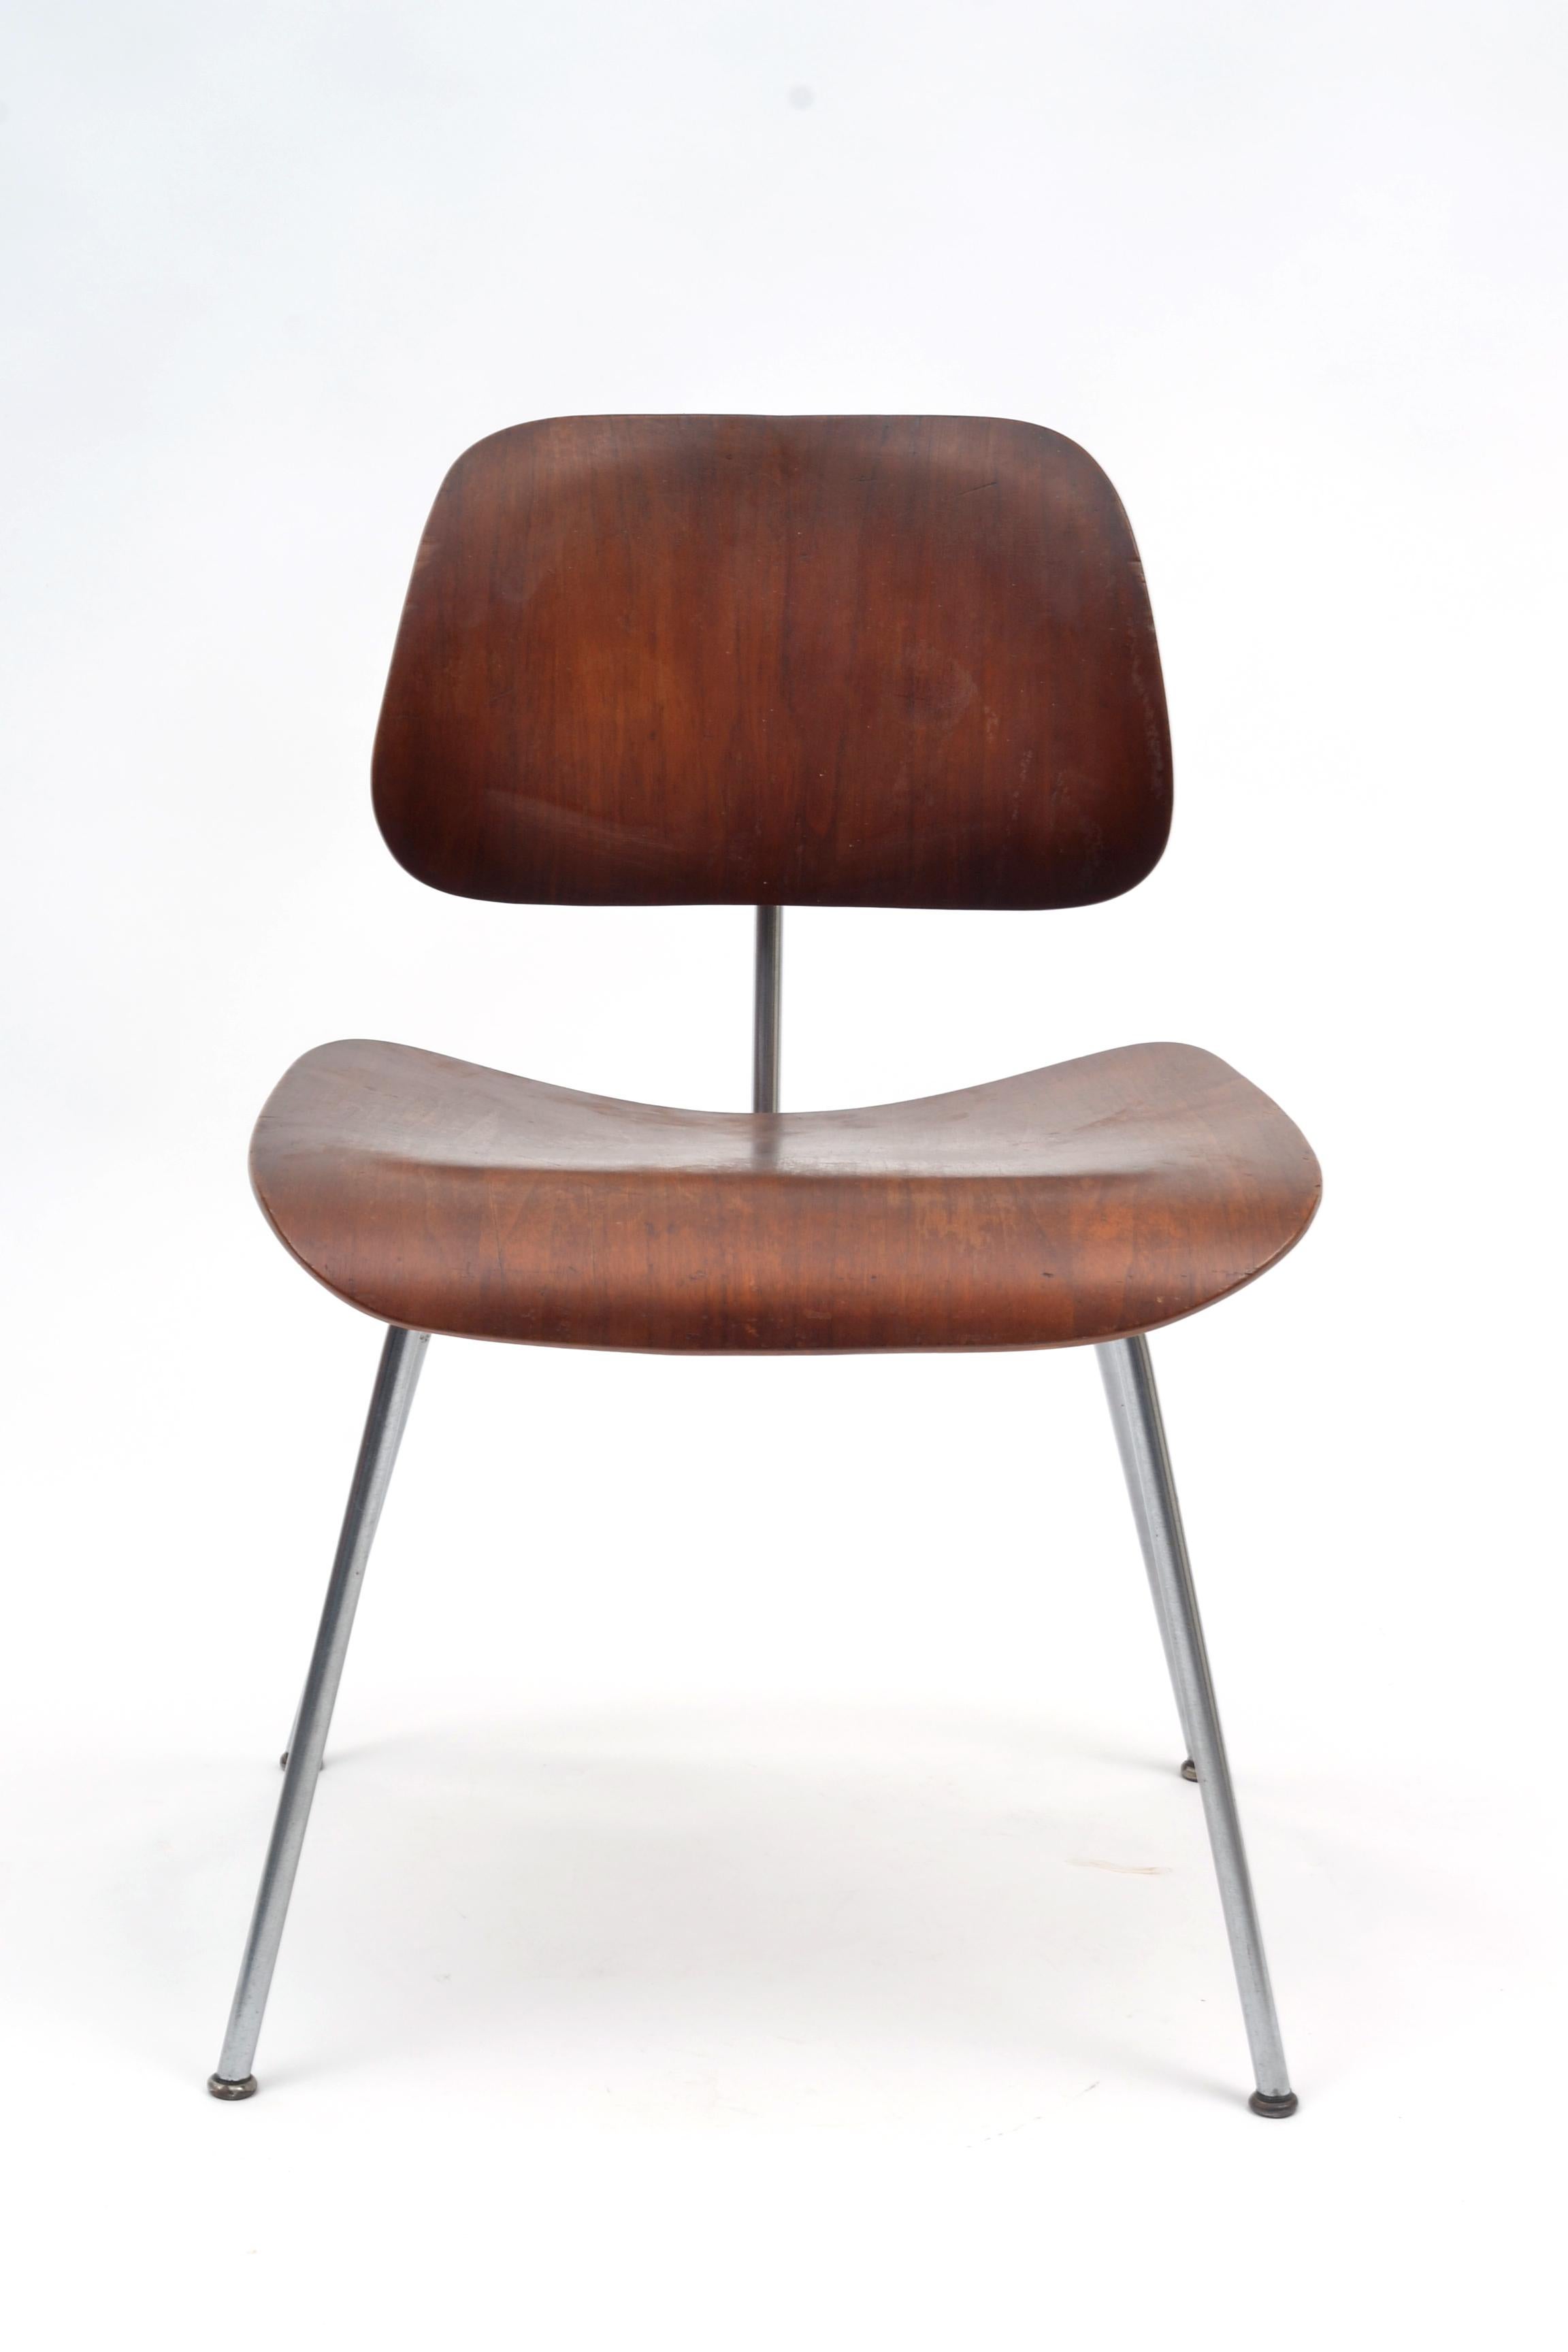 Vintage Herman Miller Eames DCM. The finish appears to be an aniline red and the backrest shockmounts have been replaced. Retains the Herman Miller foil label as pictured. The DCM is a great example of Classic Eames Office design.